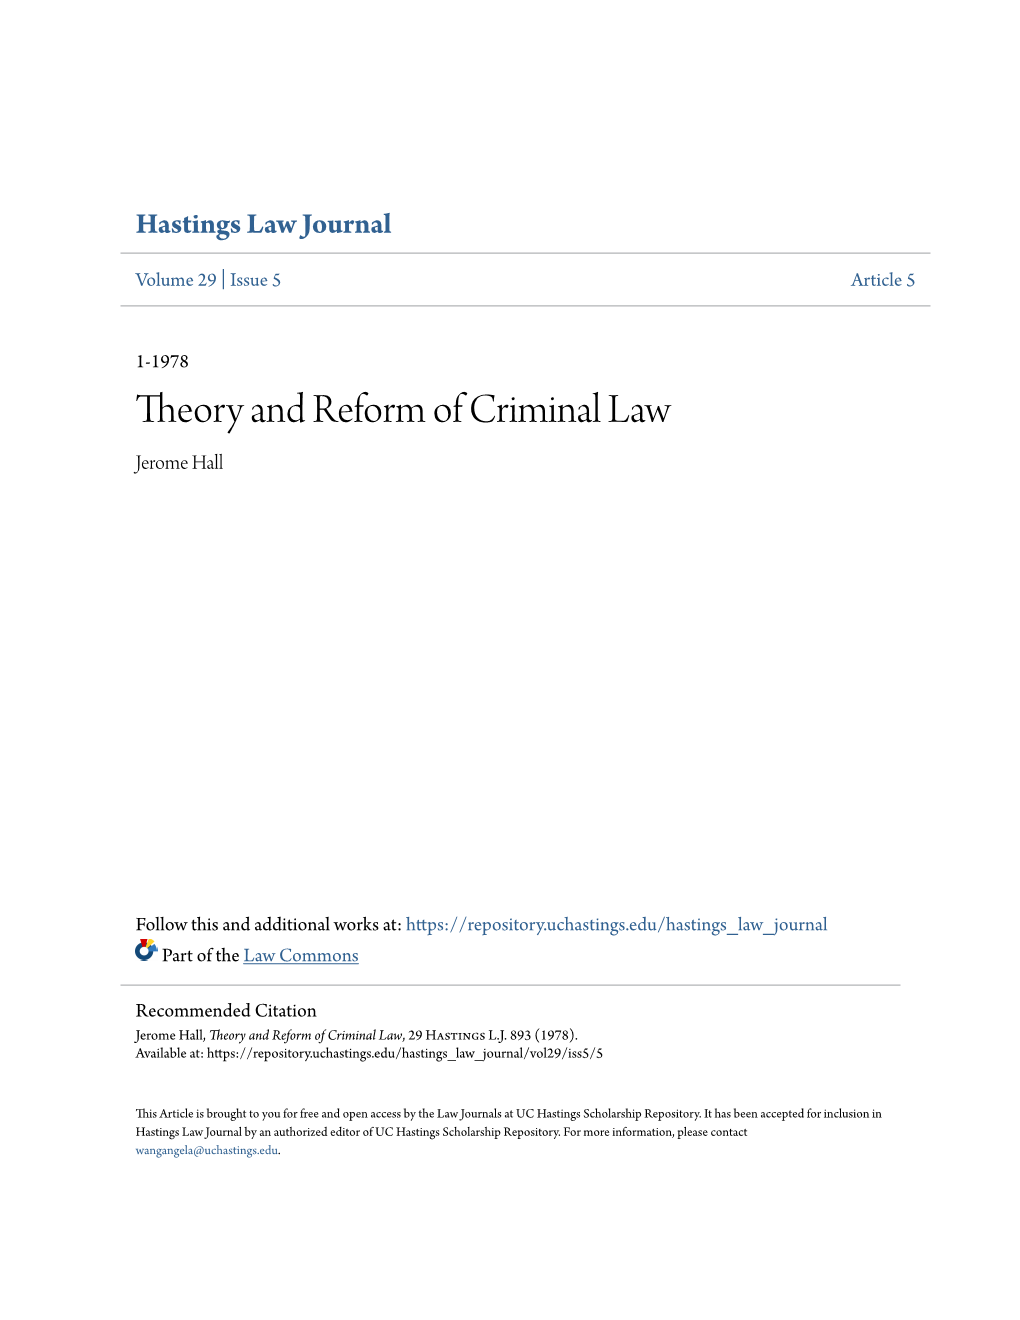 Theory and Reform of Criminal Law Jerome Hall